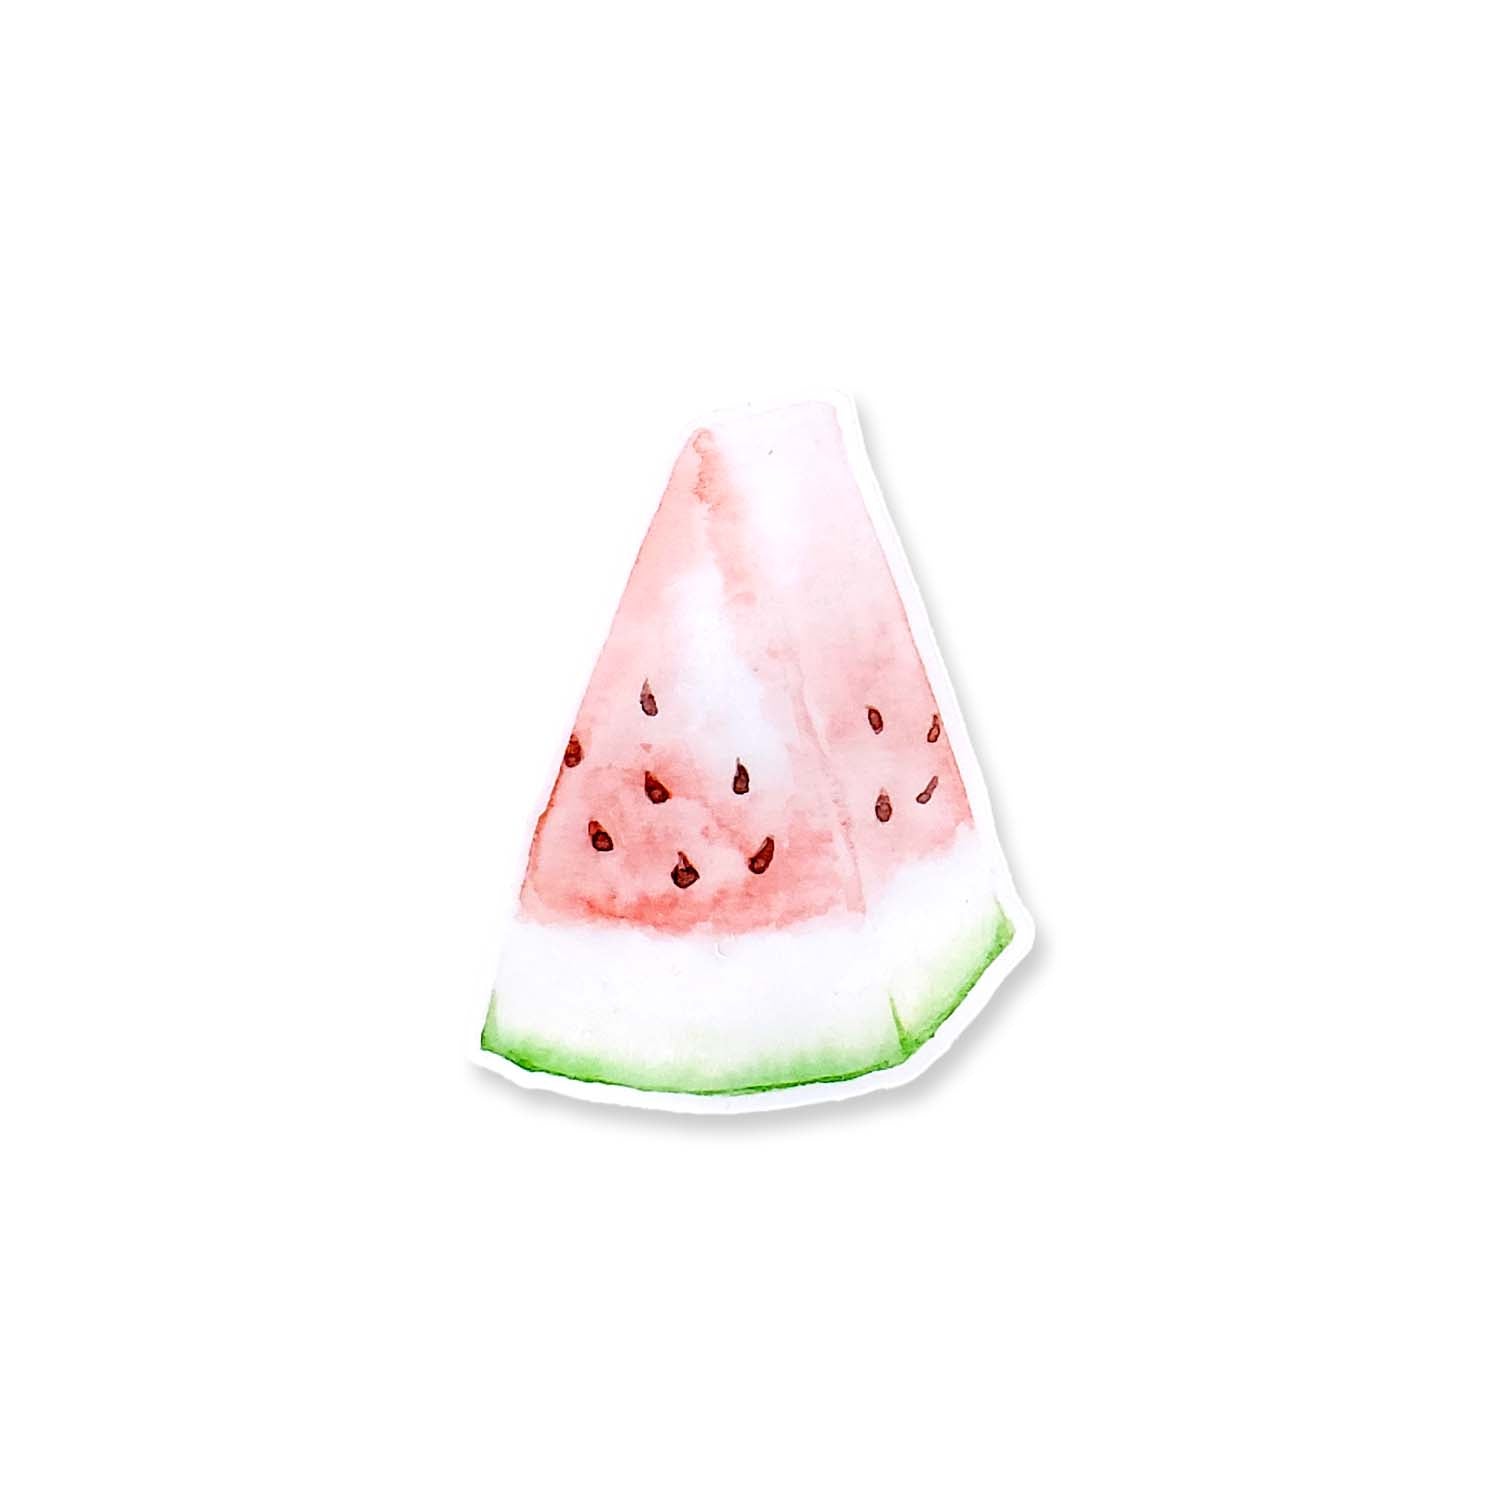 3" vinyl sticker of a watercolor painted slice of watermelon